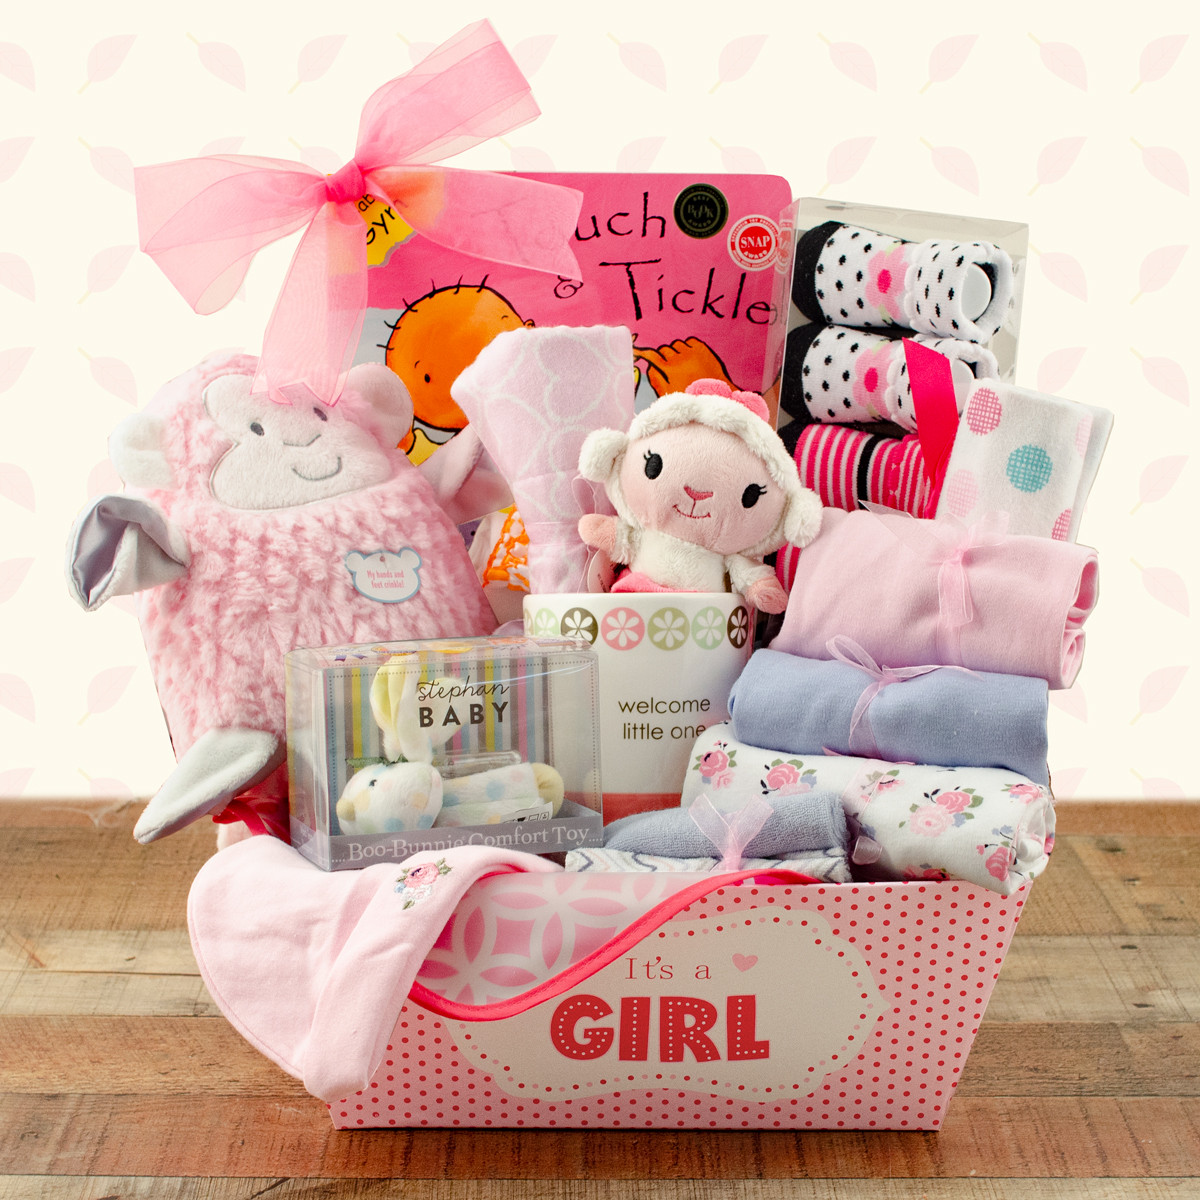 It's a Girl: Baby Girl Gift Basket - Gift Baskets for Delivery